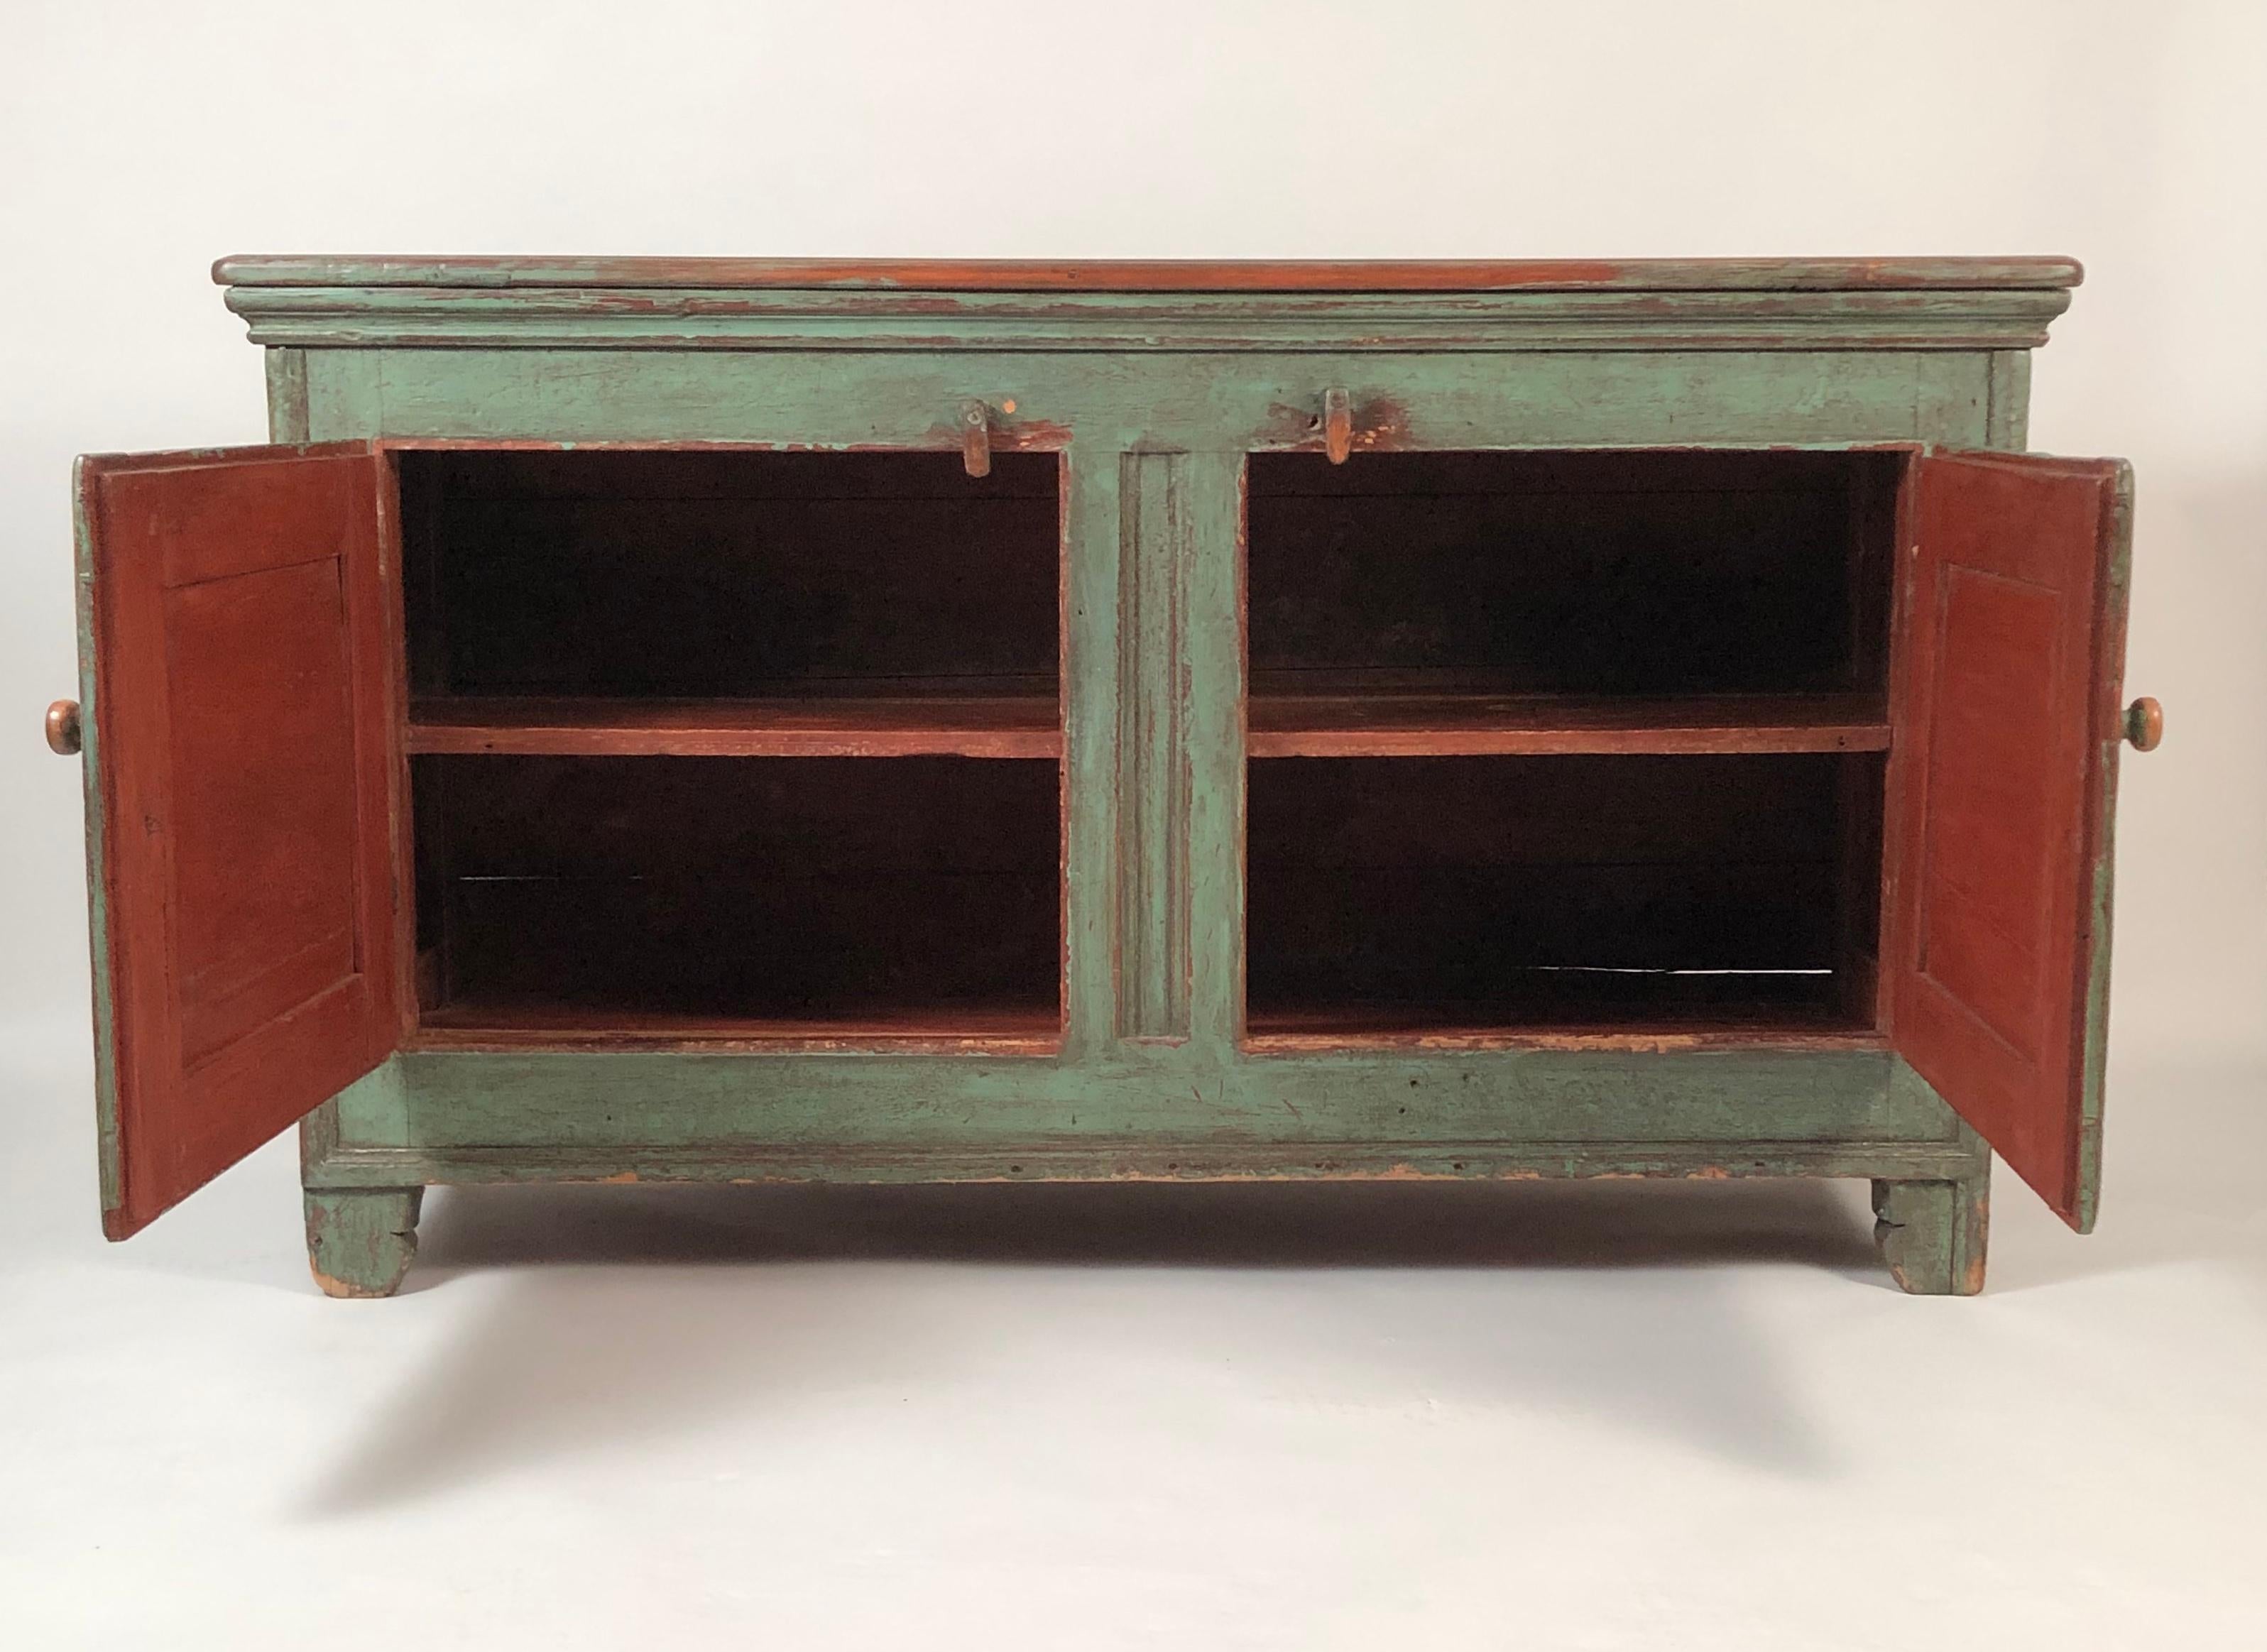 An antique French Canadian country side cabinet in beautiful old green paint, of rectangular form with two cupboard doors, each with an inset panel. Perfect as a buffet or server or anywhere cabinet world be useful. Great color and surface and